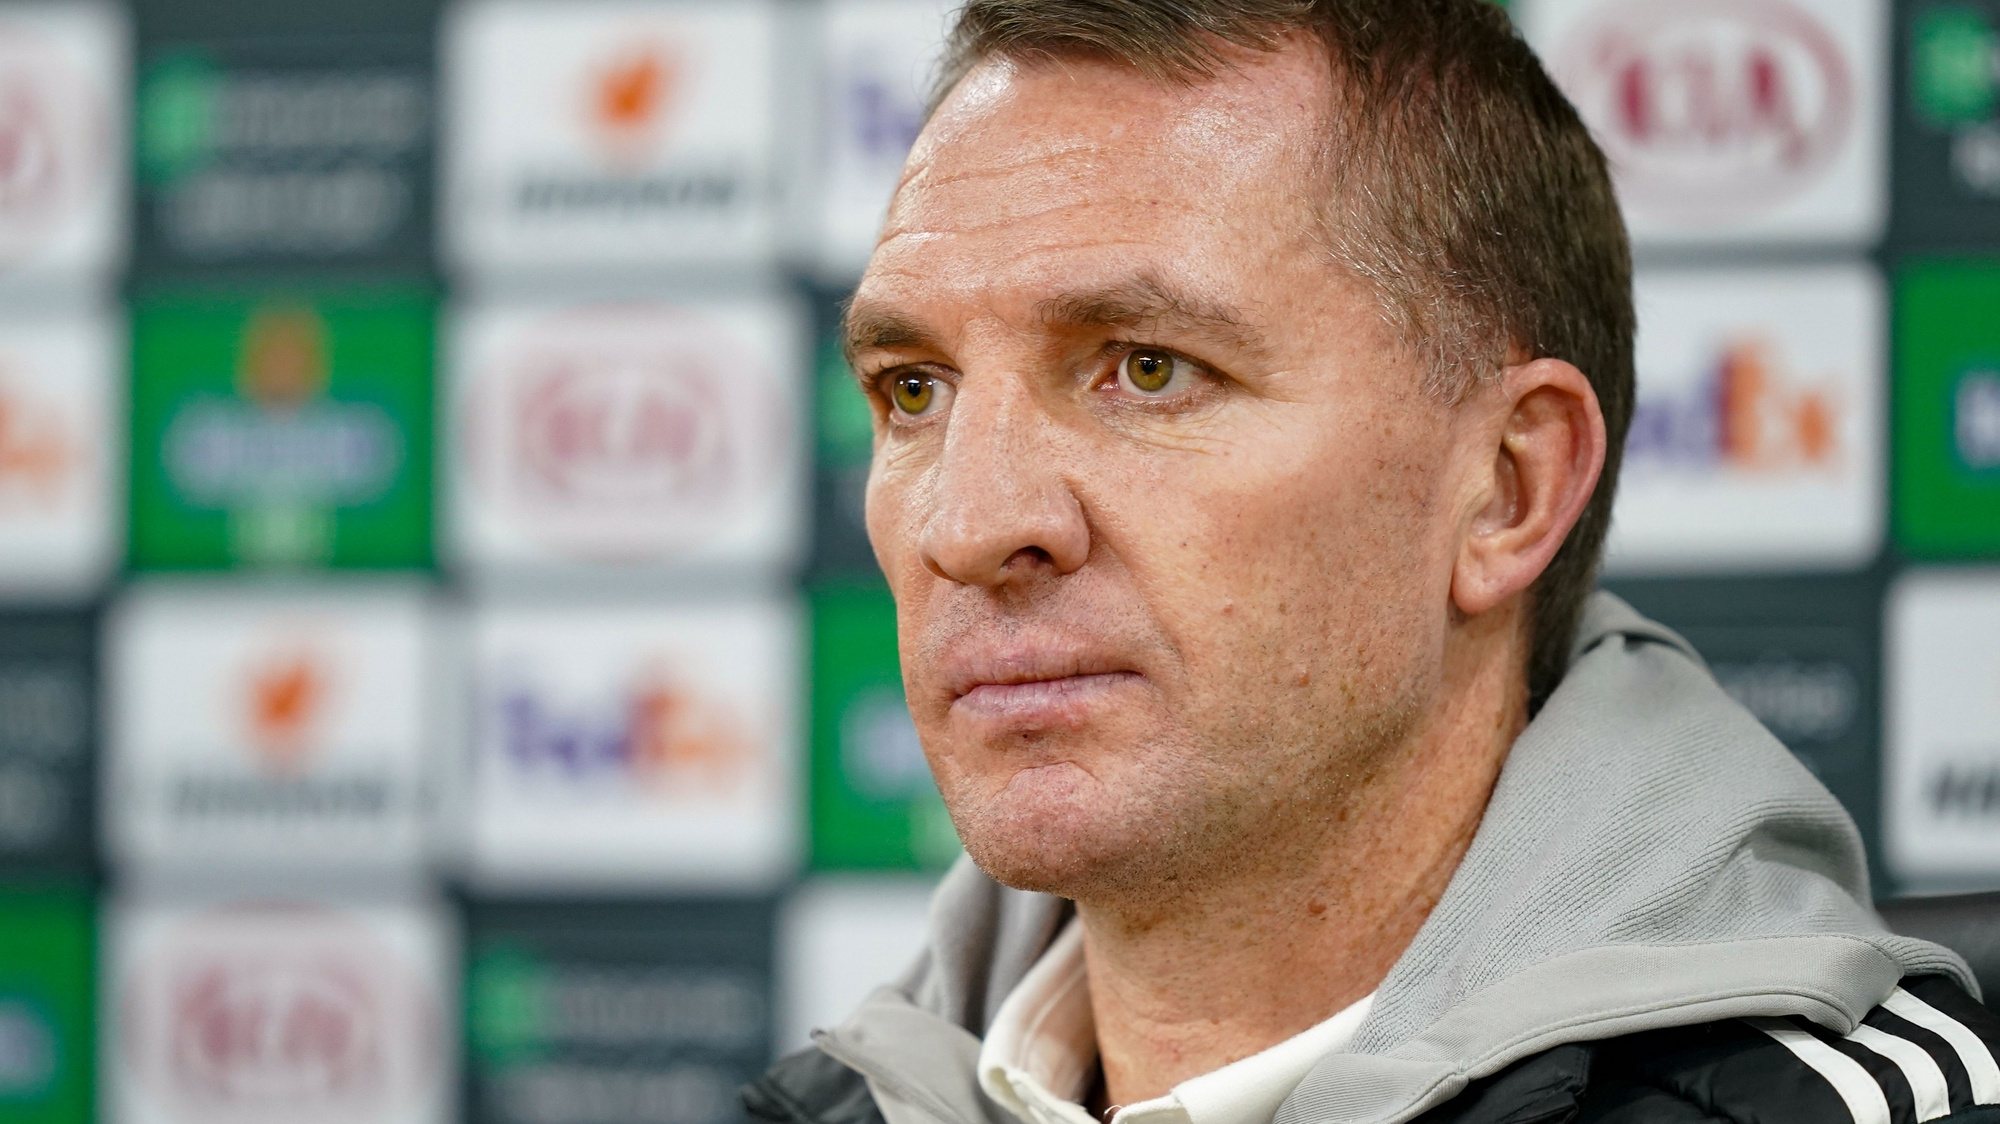 Leicester head coach Brendan Rodgers during a press conference in Braga, Portugal, 25th November 2020. Leicester will play against Sporting de Braga in tomorrow`s UEFA Europa League soccer match to be played in Braga. HUGO DELGADO/LUSA